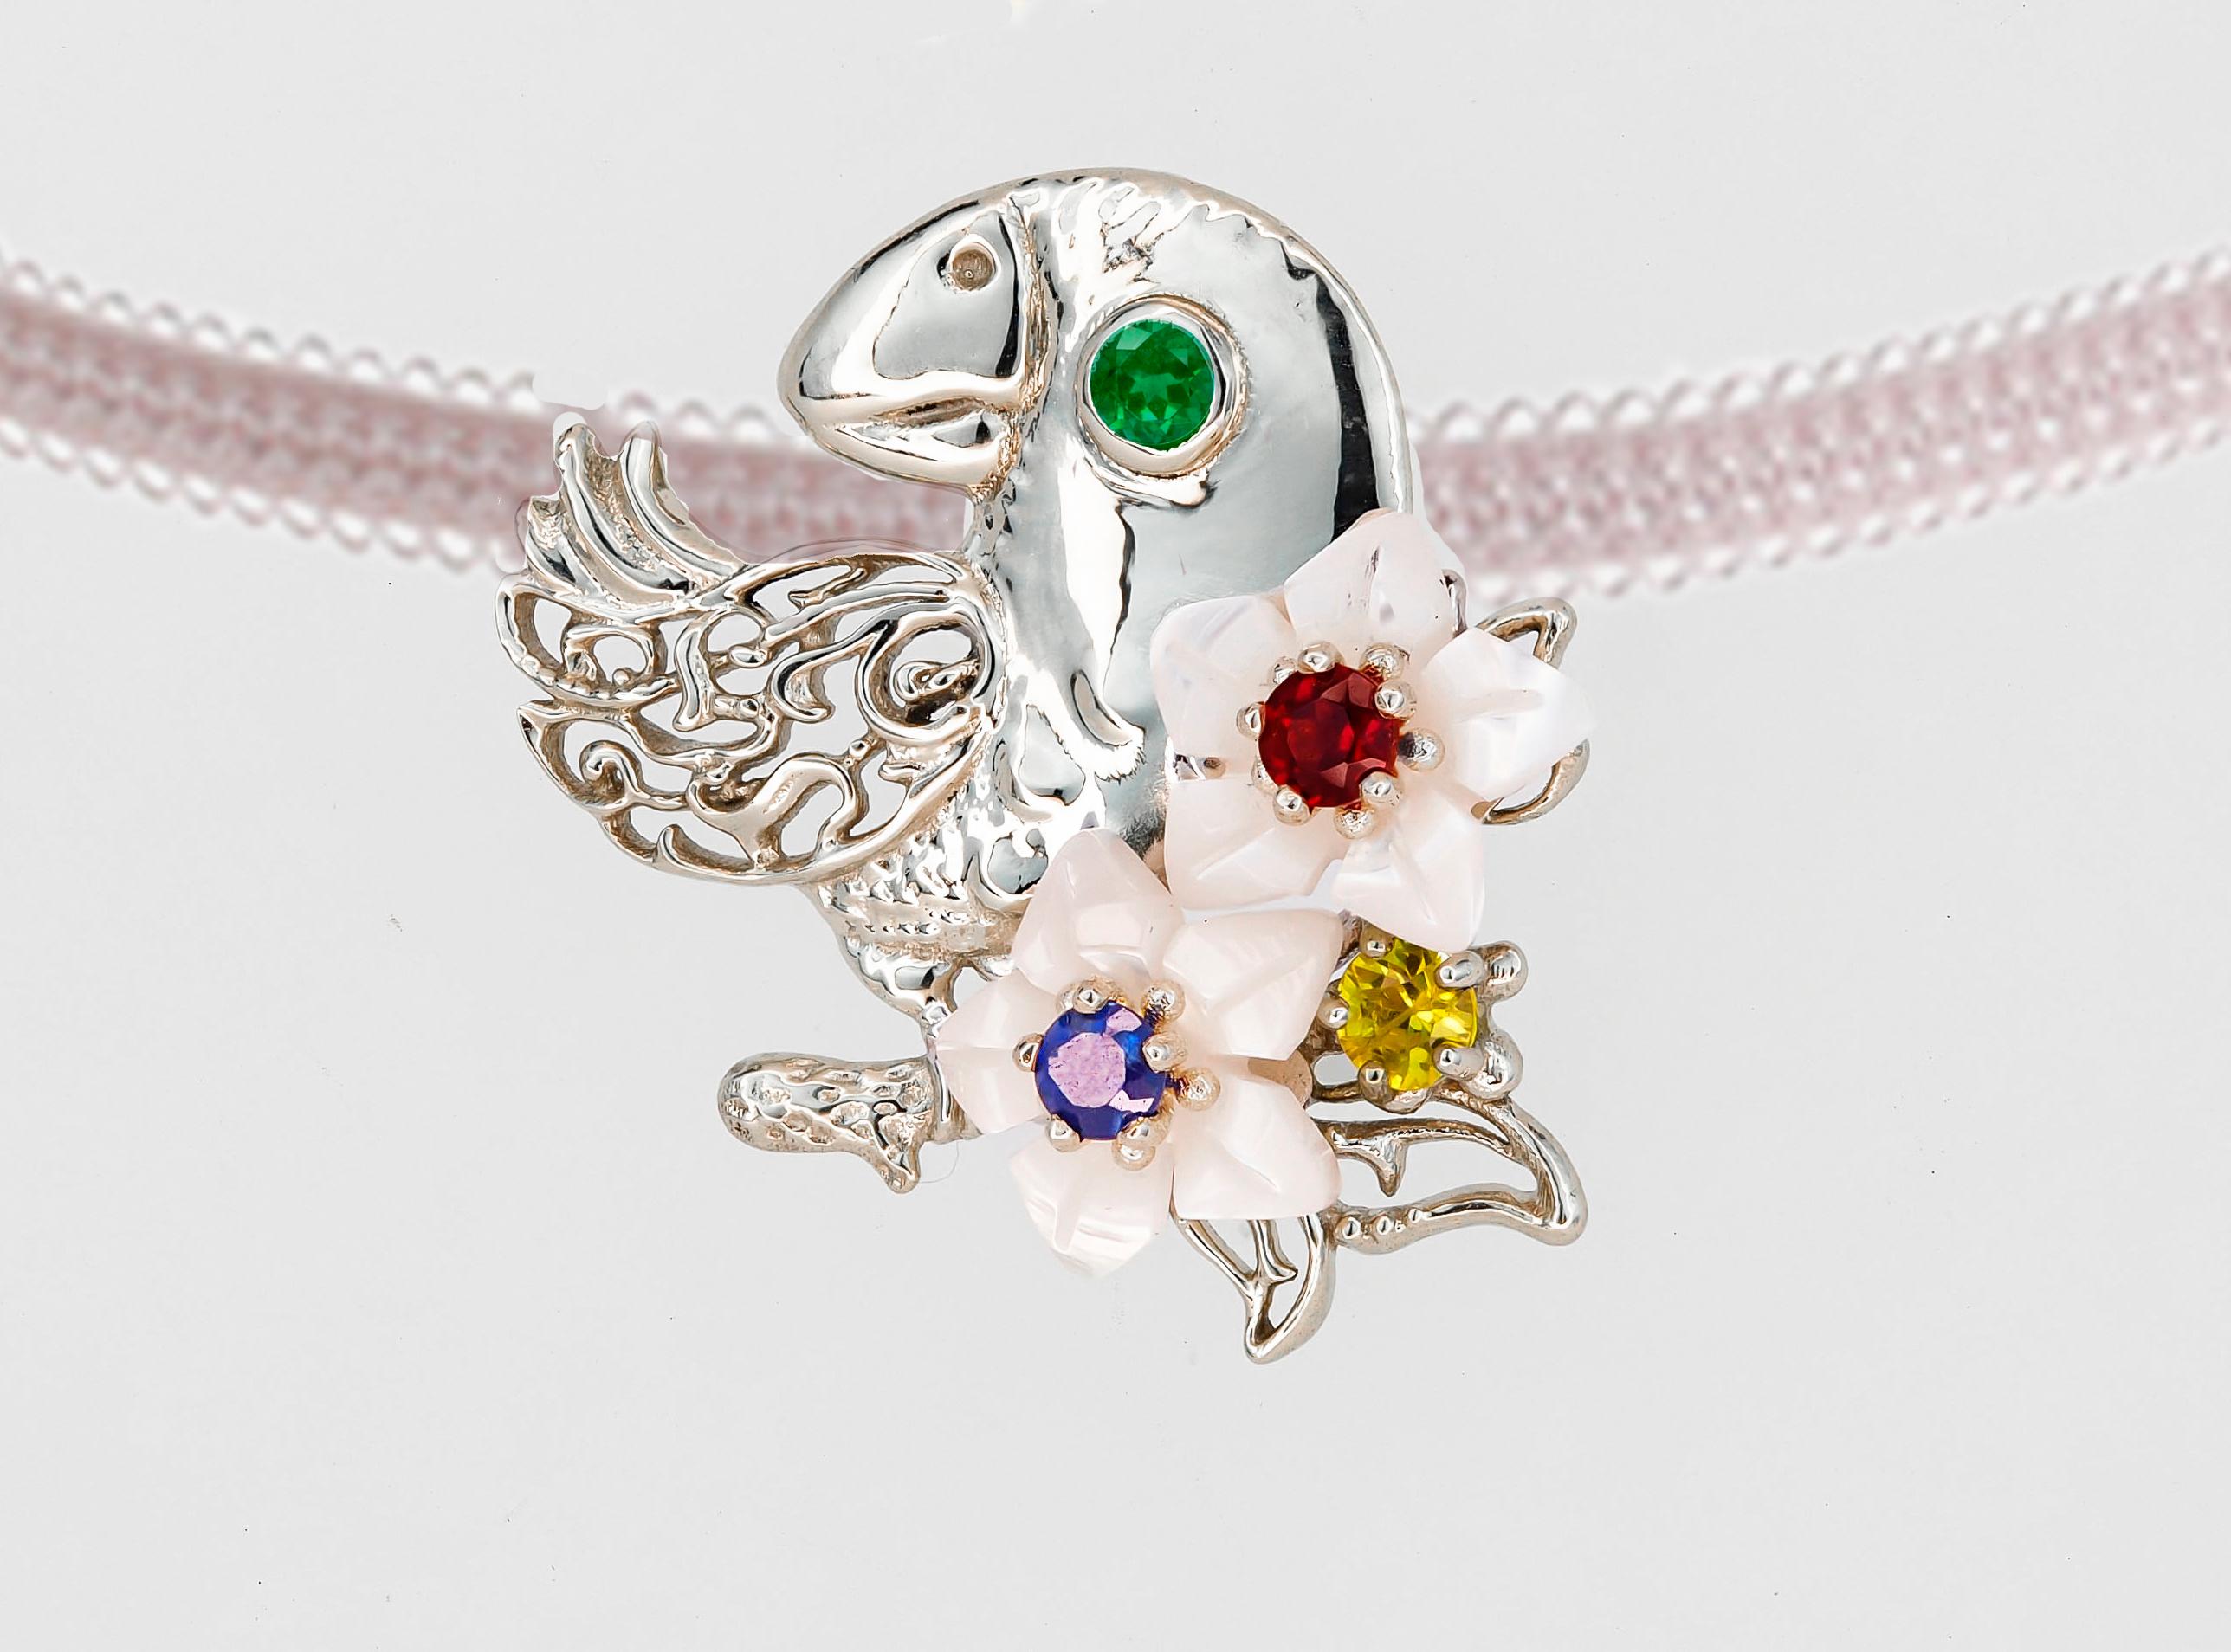 Round Cut Parrot on flower pendant with colored gems.  For Sale